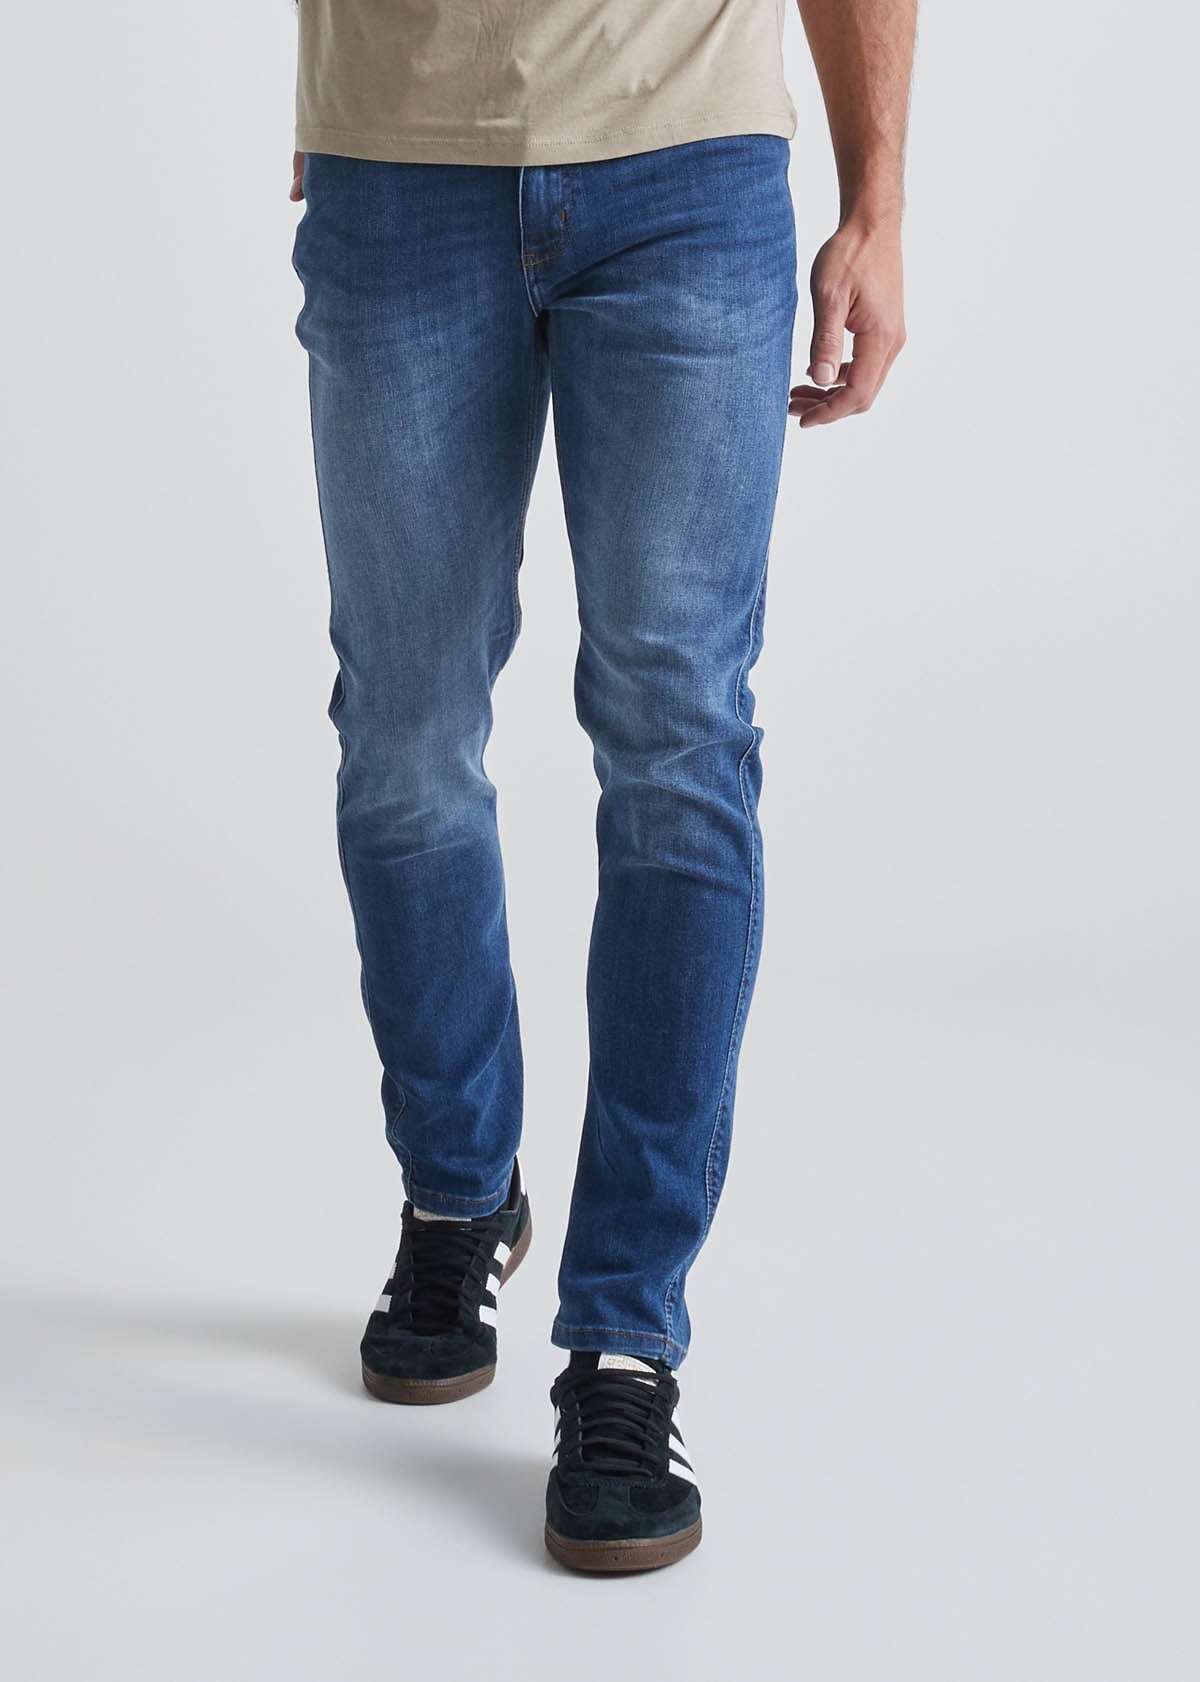 Men's Tapered Fit Jeans, Men's Slim Tapered Jeans